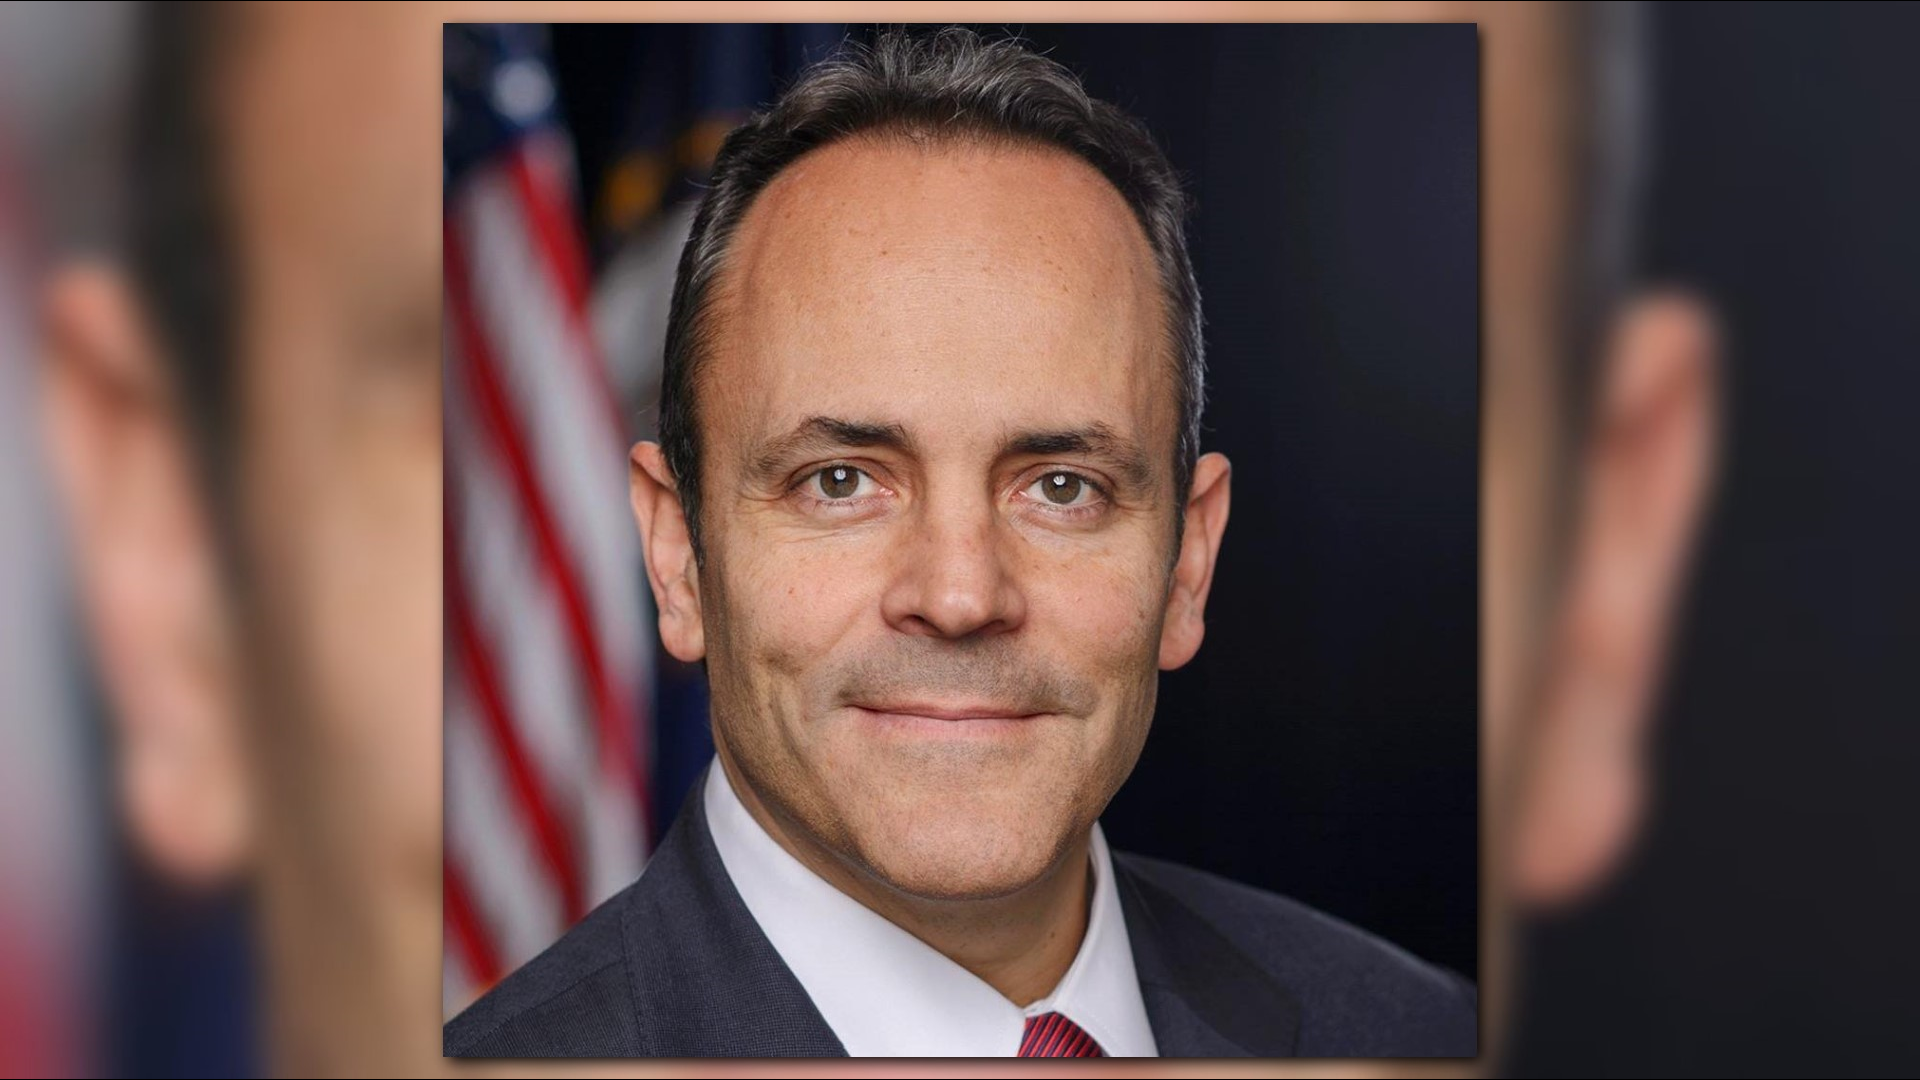 Republican Matt Bevin defends his seat, winning the primary for the Kentucky Governor's seat.